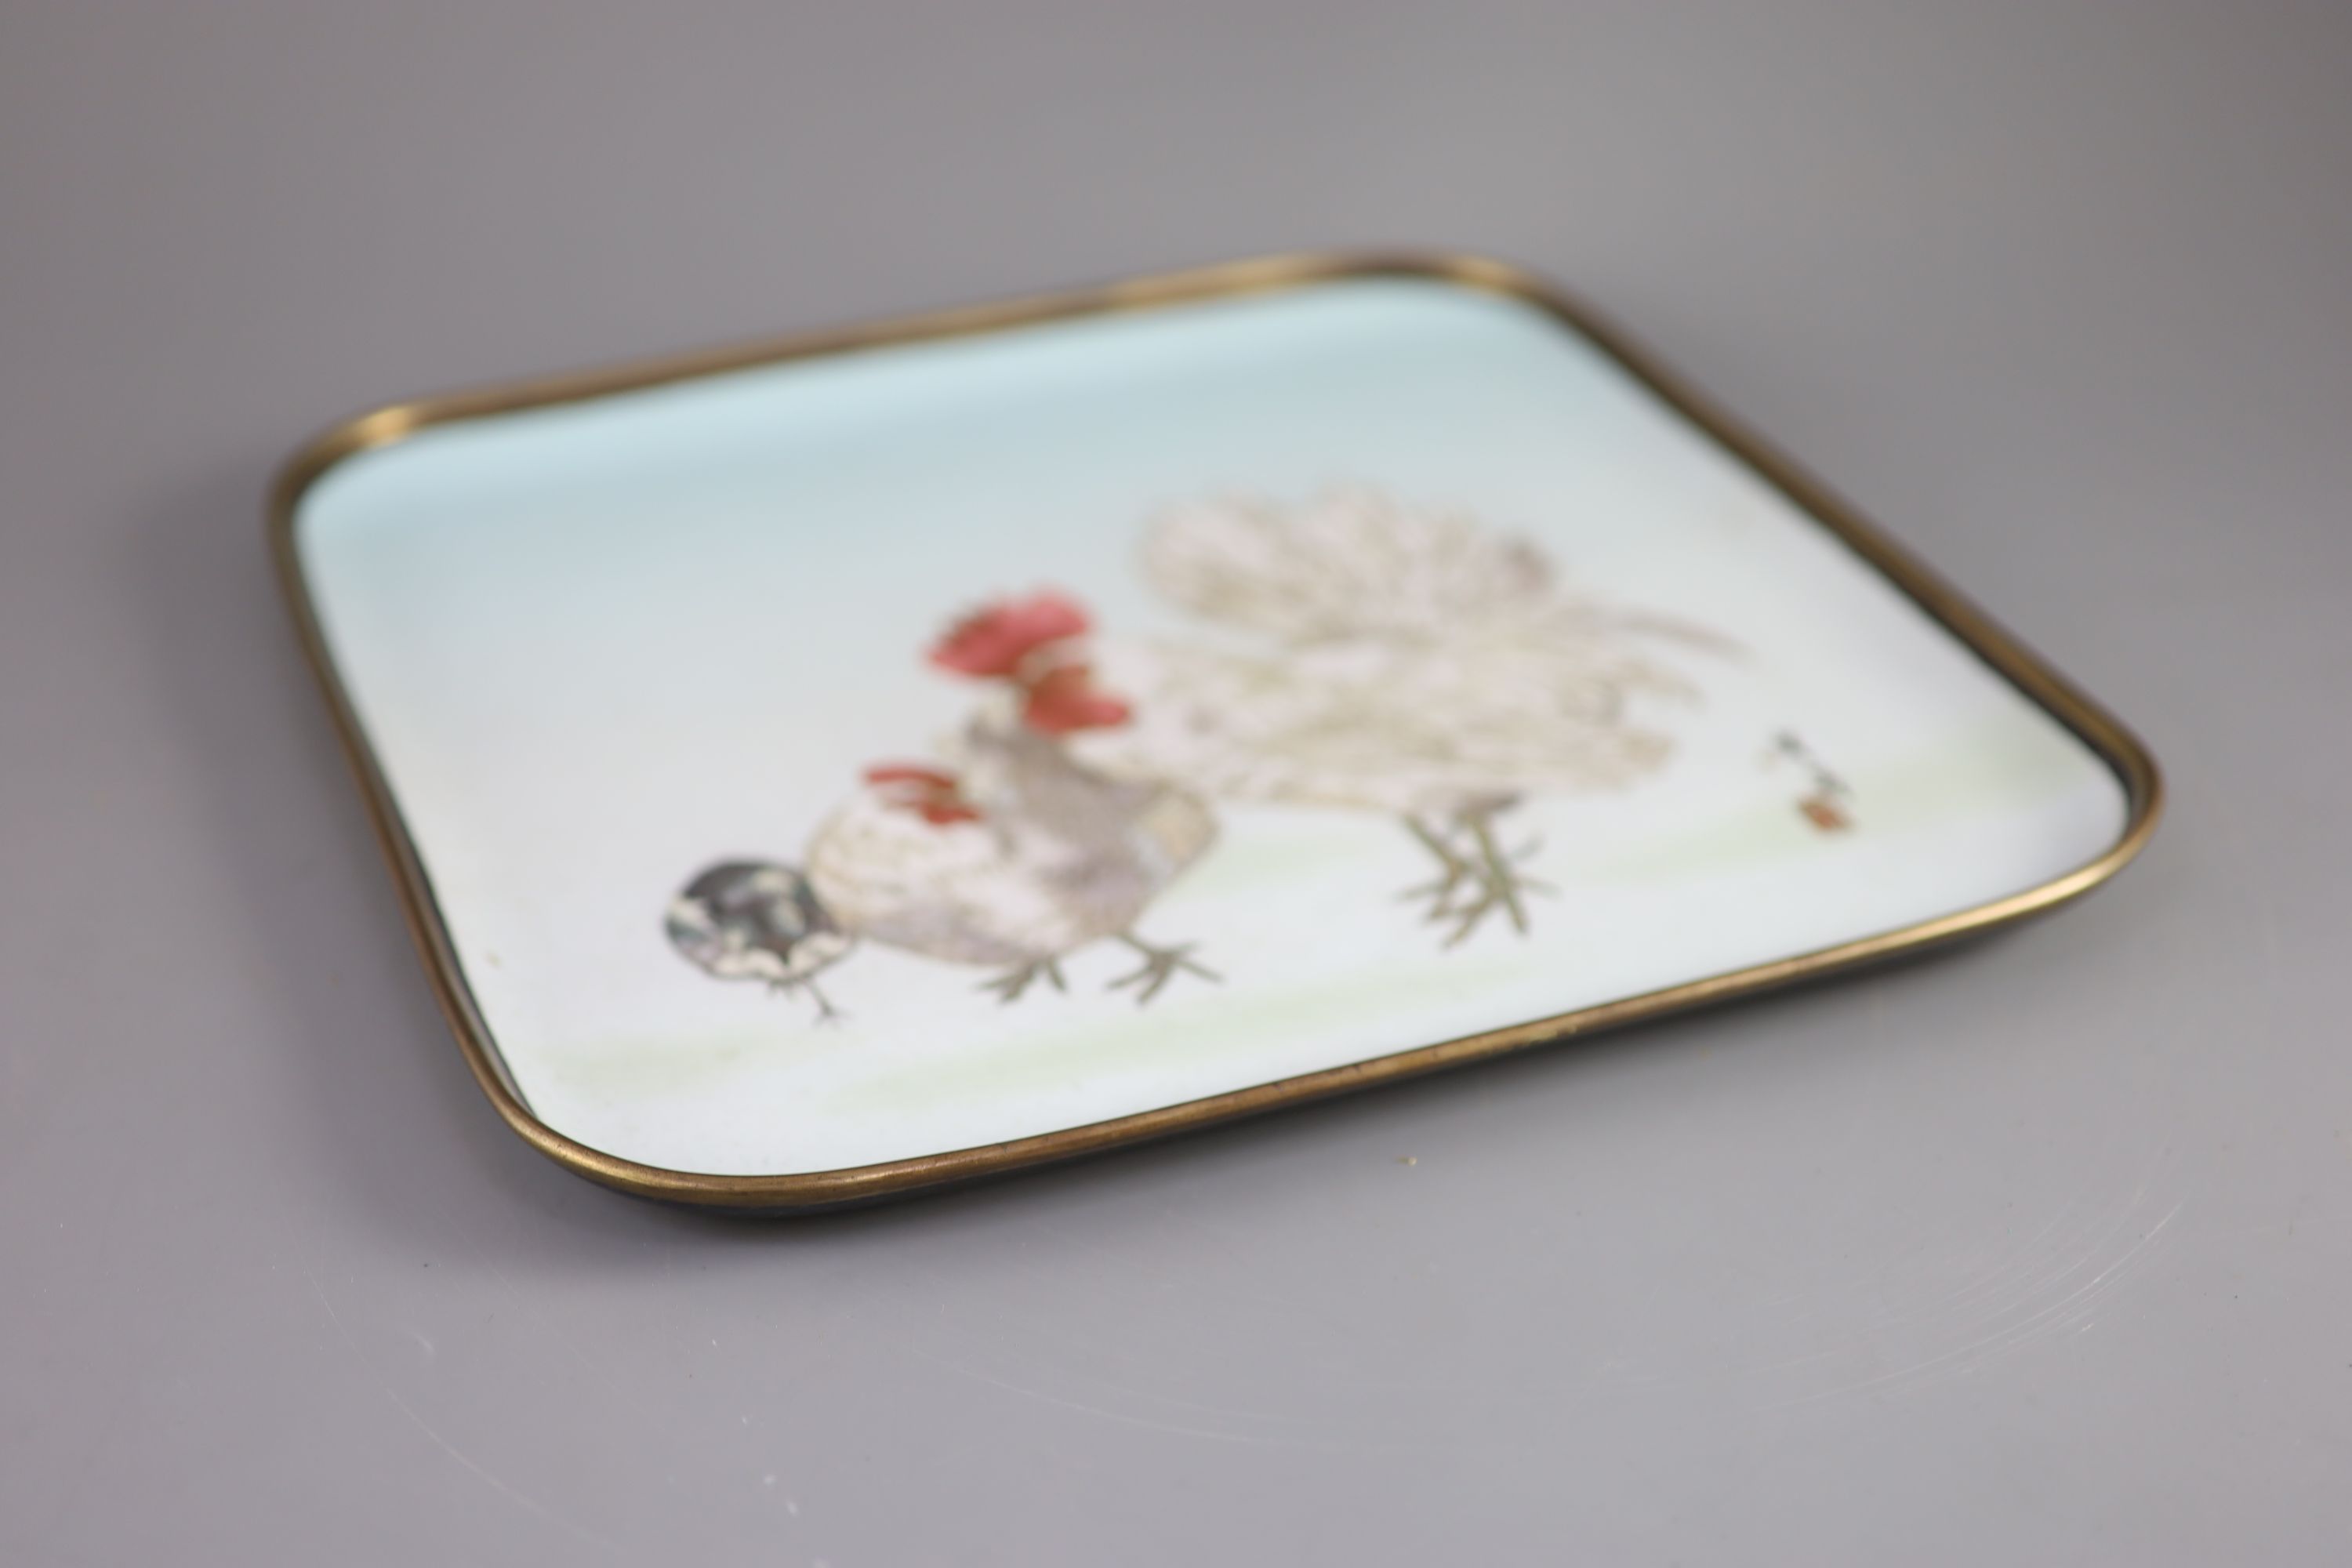 A Japanese square silver wire cloisonné enamel tray, Meiji period, mark for Deakin Bros & Co., - Image 2 of 4